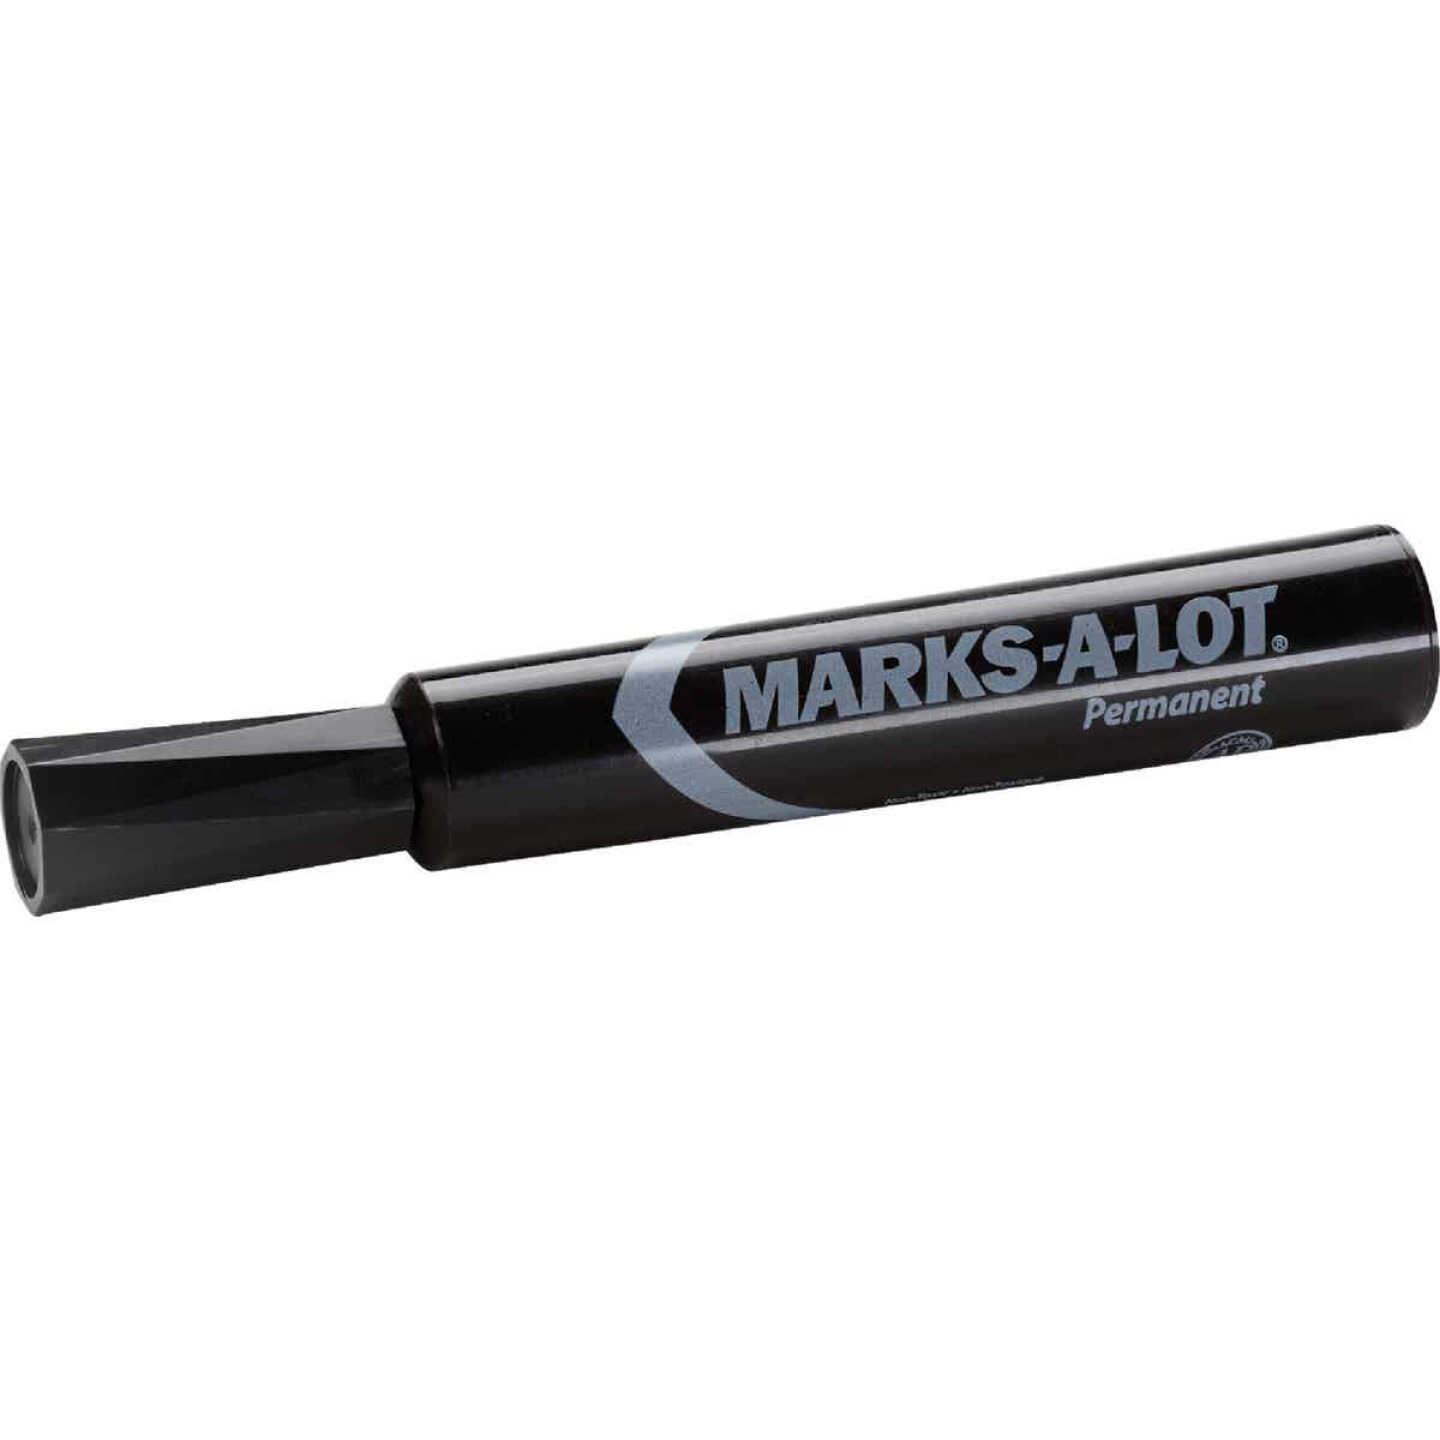 Marks-A-Lot Black Regular Chisel Tip Permanent Marker - Power Townsend  Company